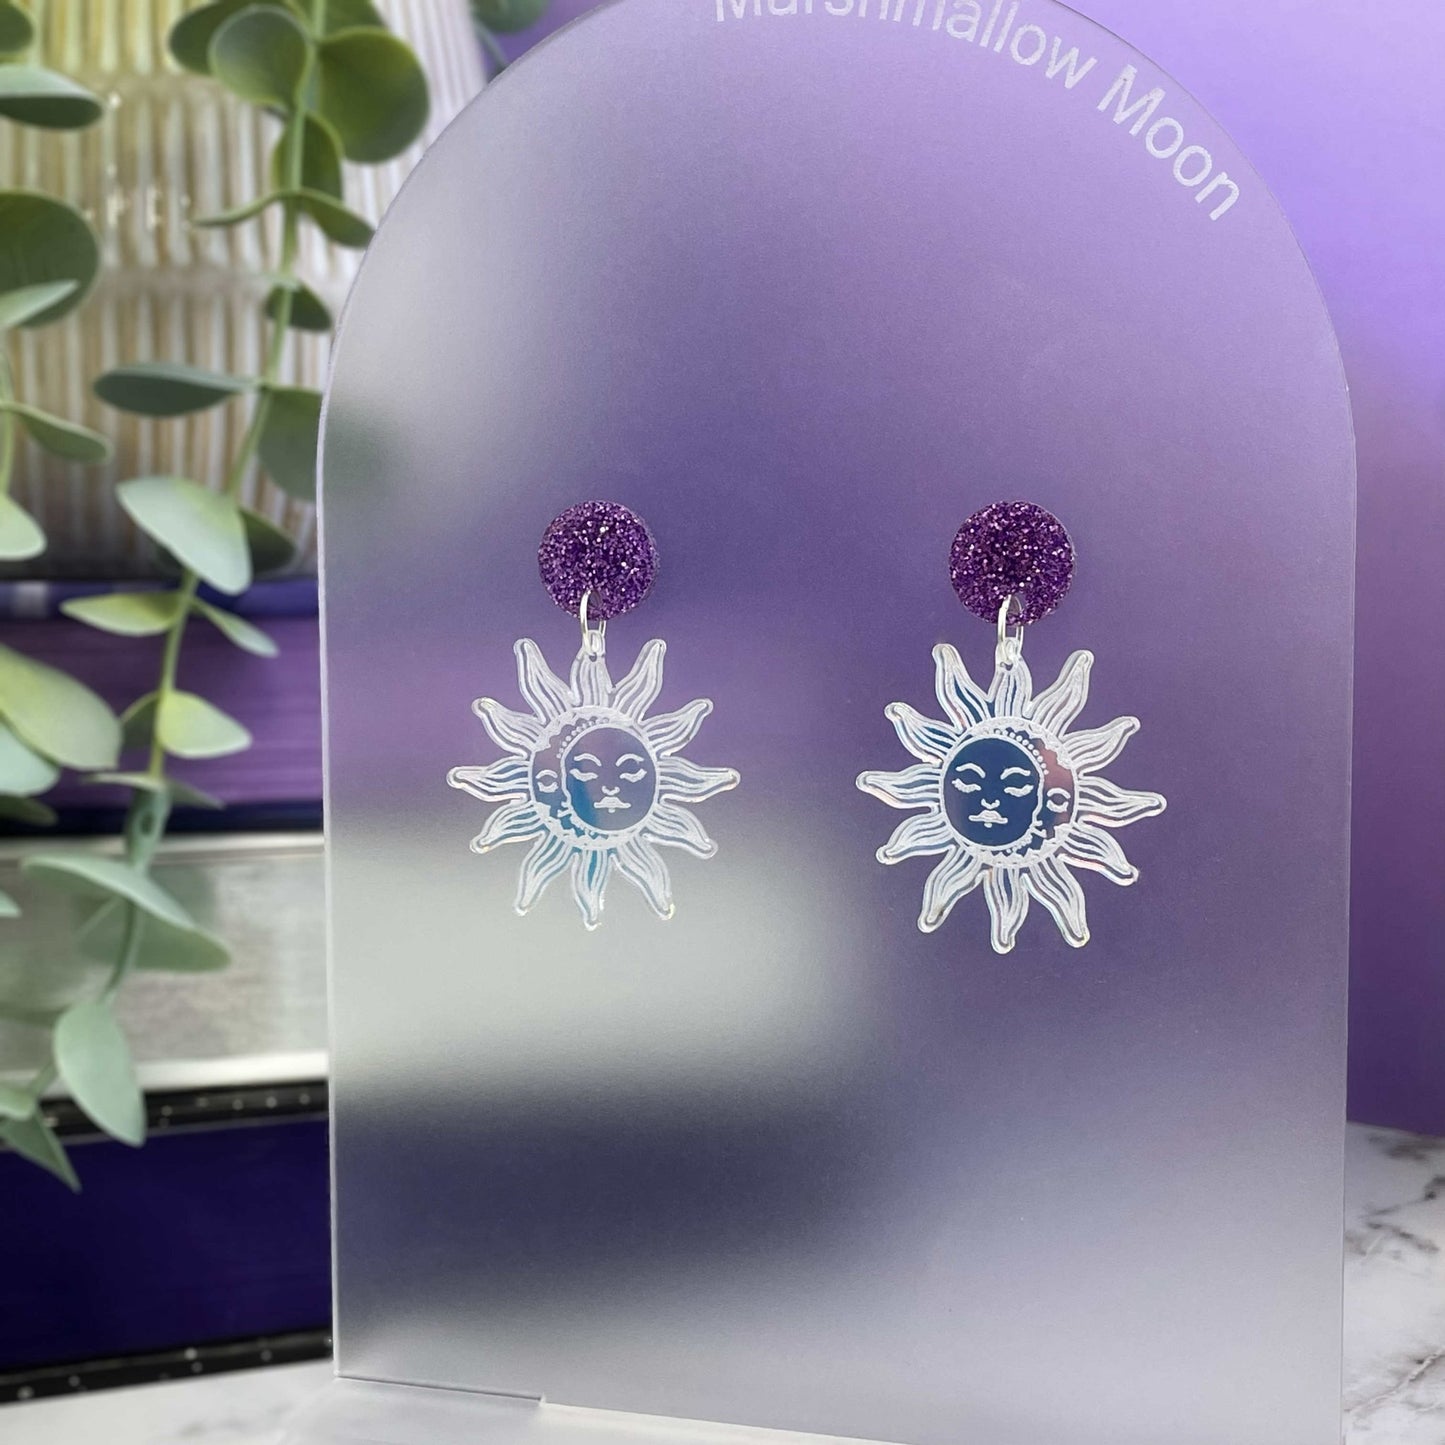 Iridescent Sun & Moon Earrings - Lost Minds Clothing